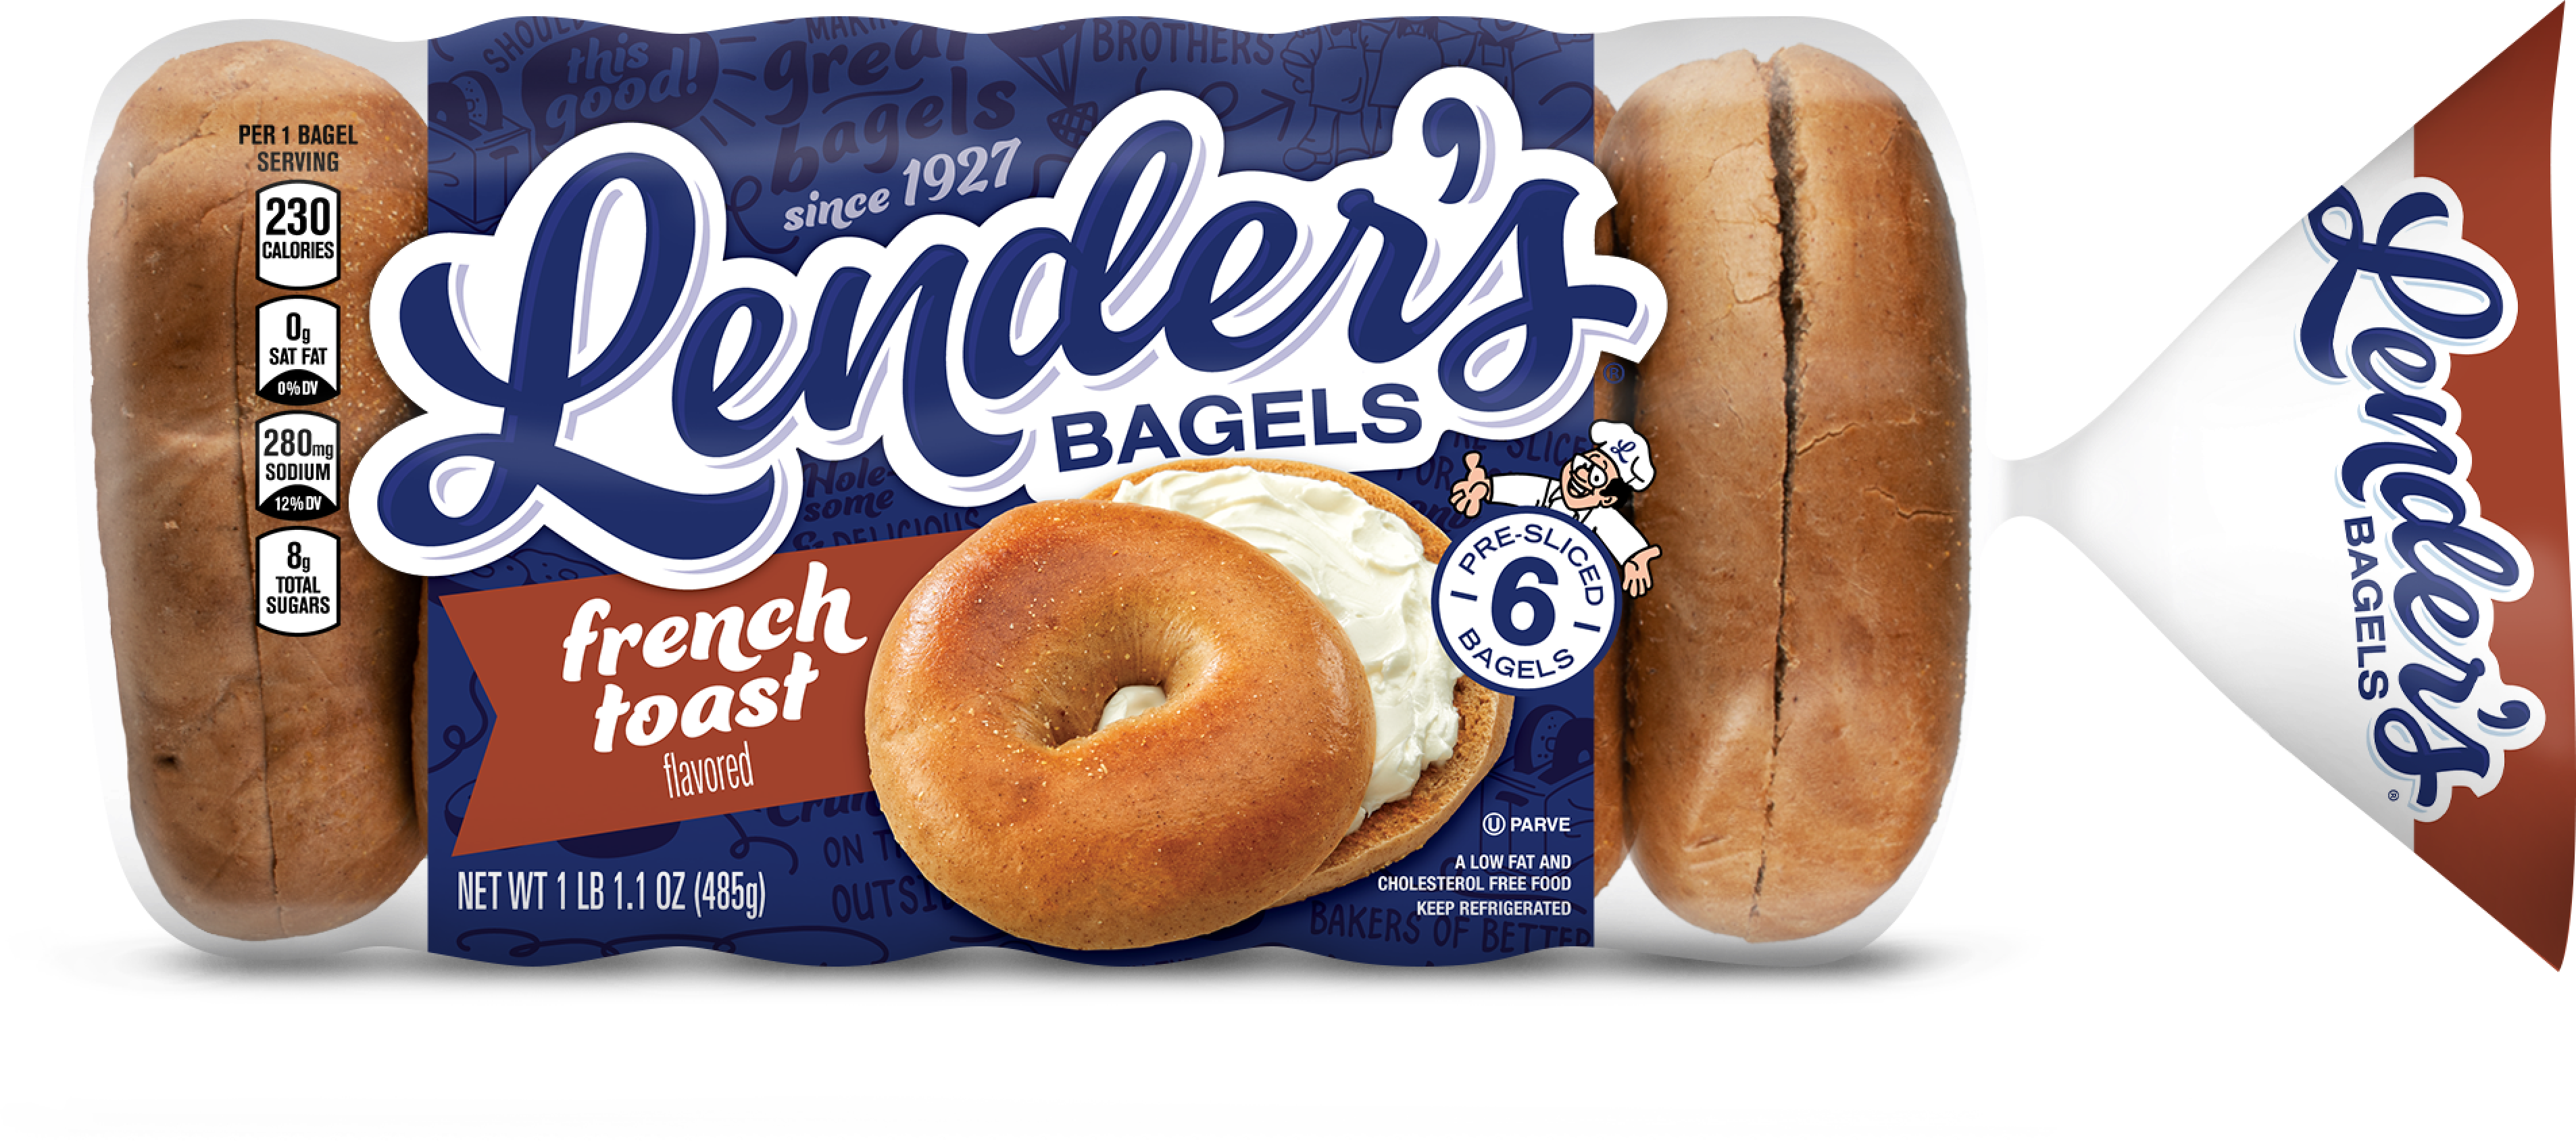 Lender&#039;s French toast bagels